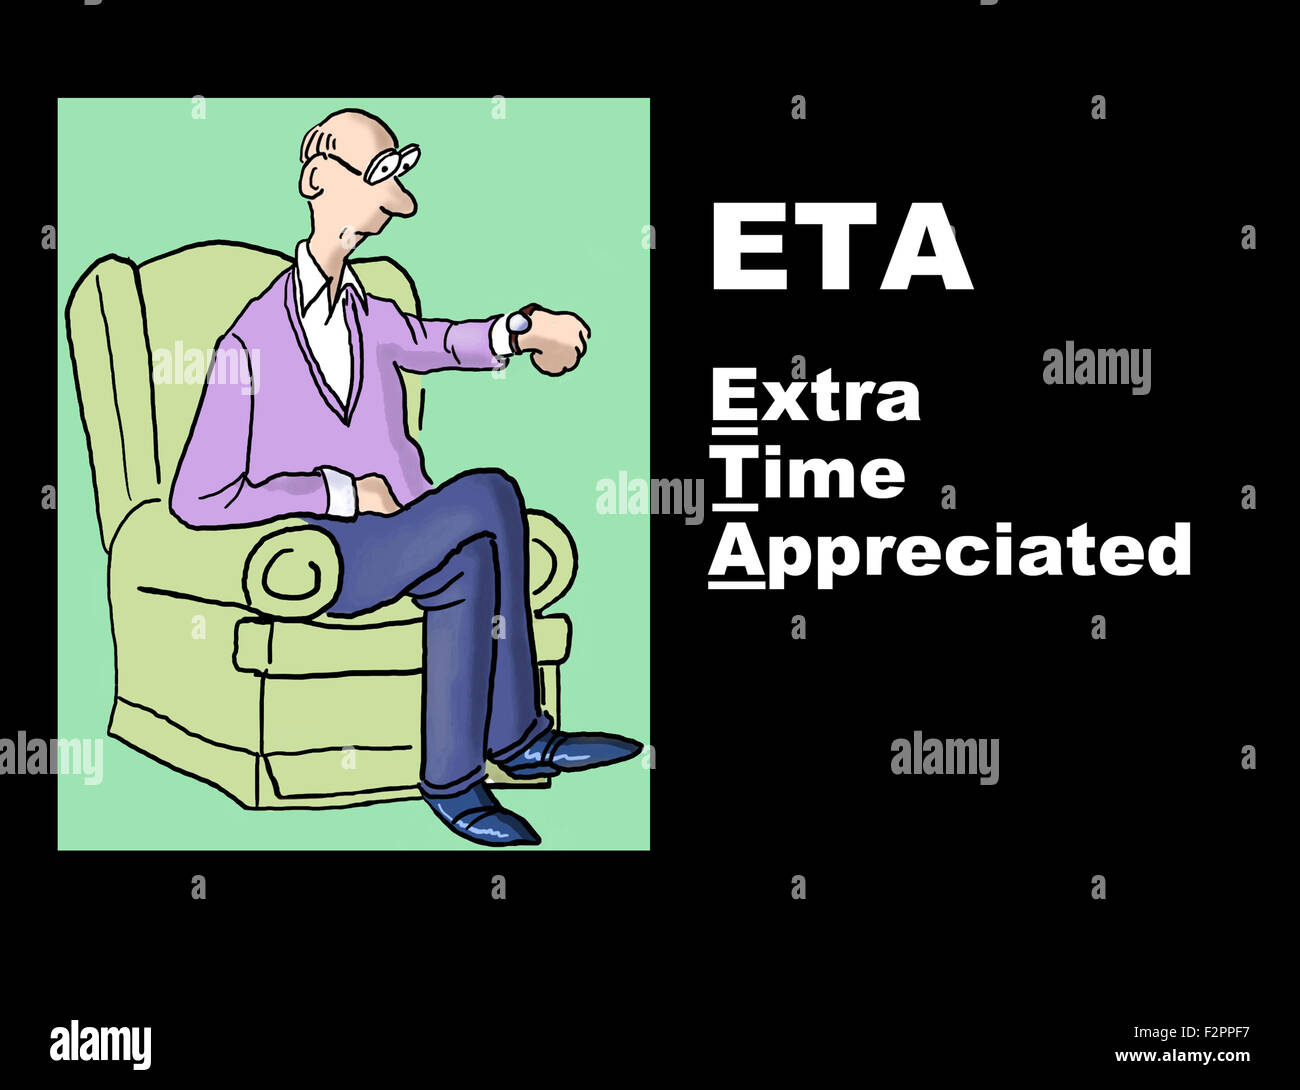 Business illustration showing a man looking at his watch and the acronym 'ETA' with a play on words, 'Extra Time Appreciated'. Stock Photo